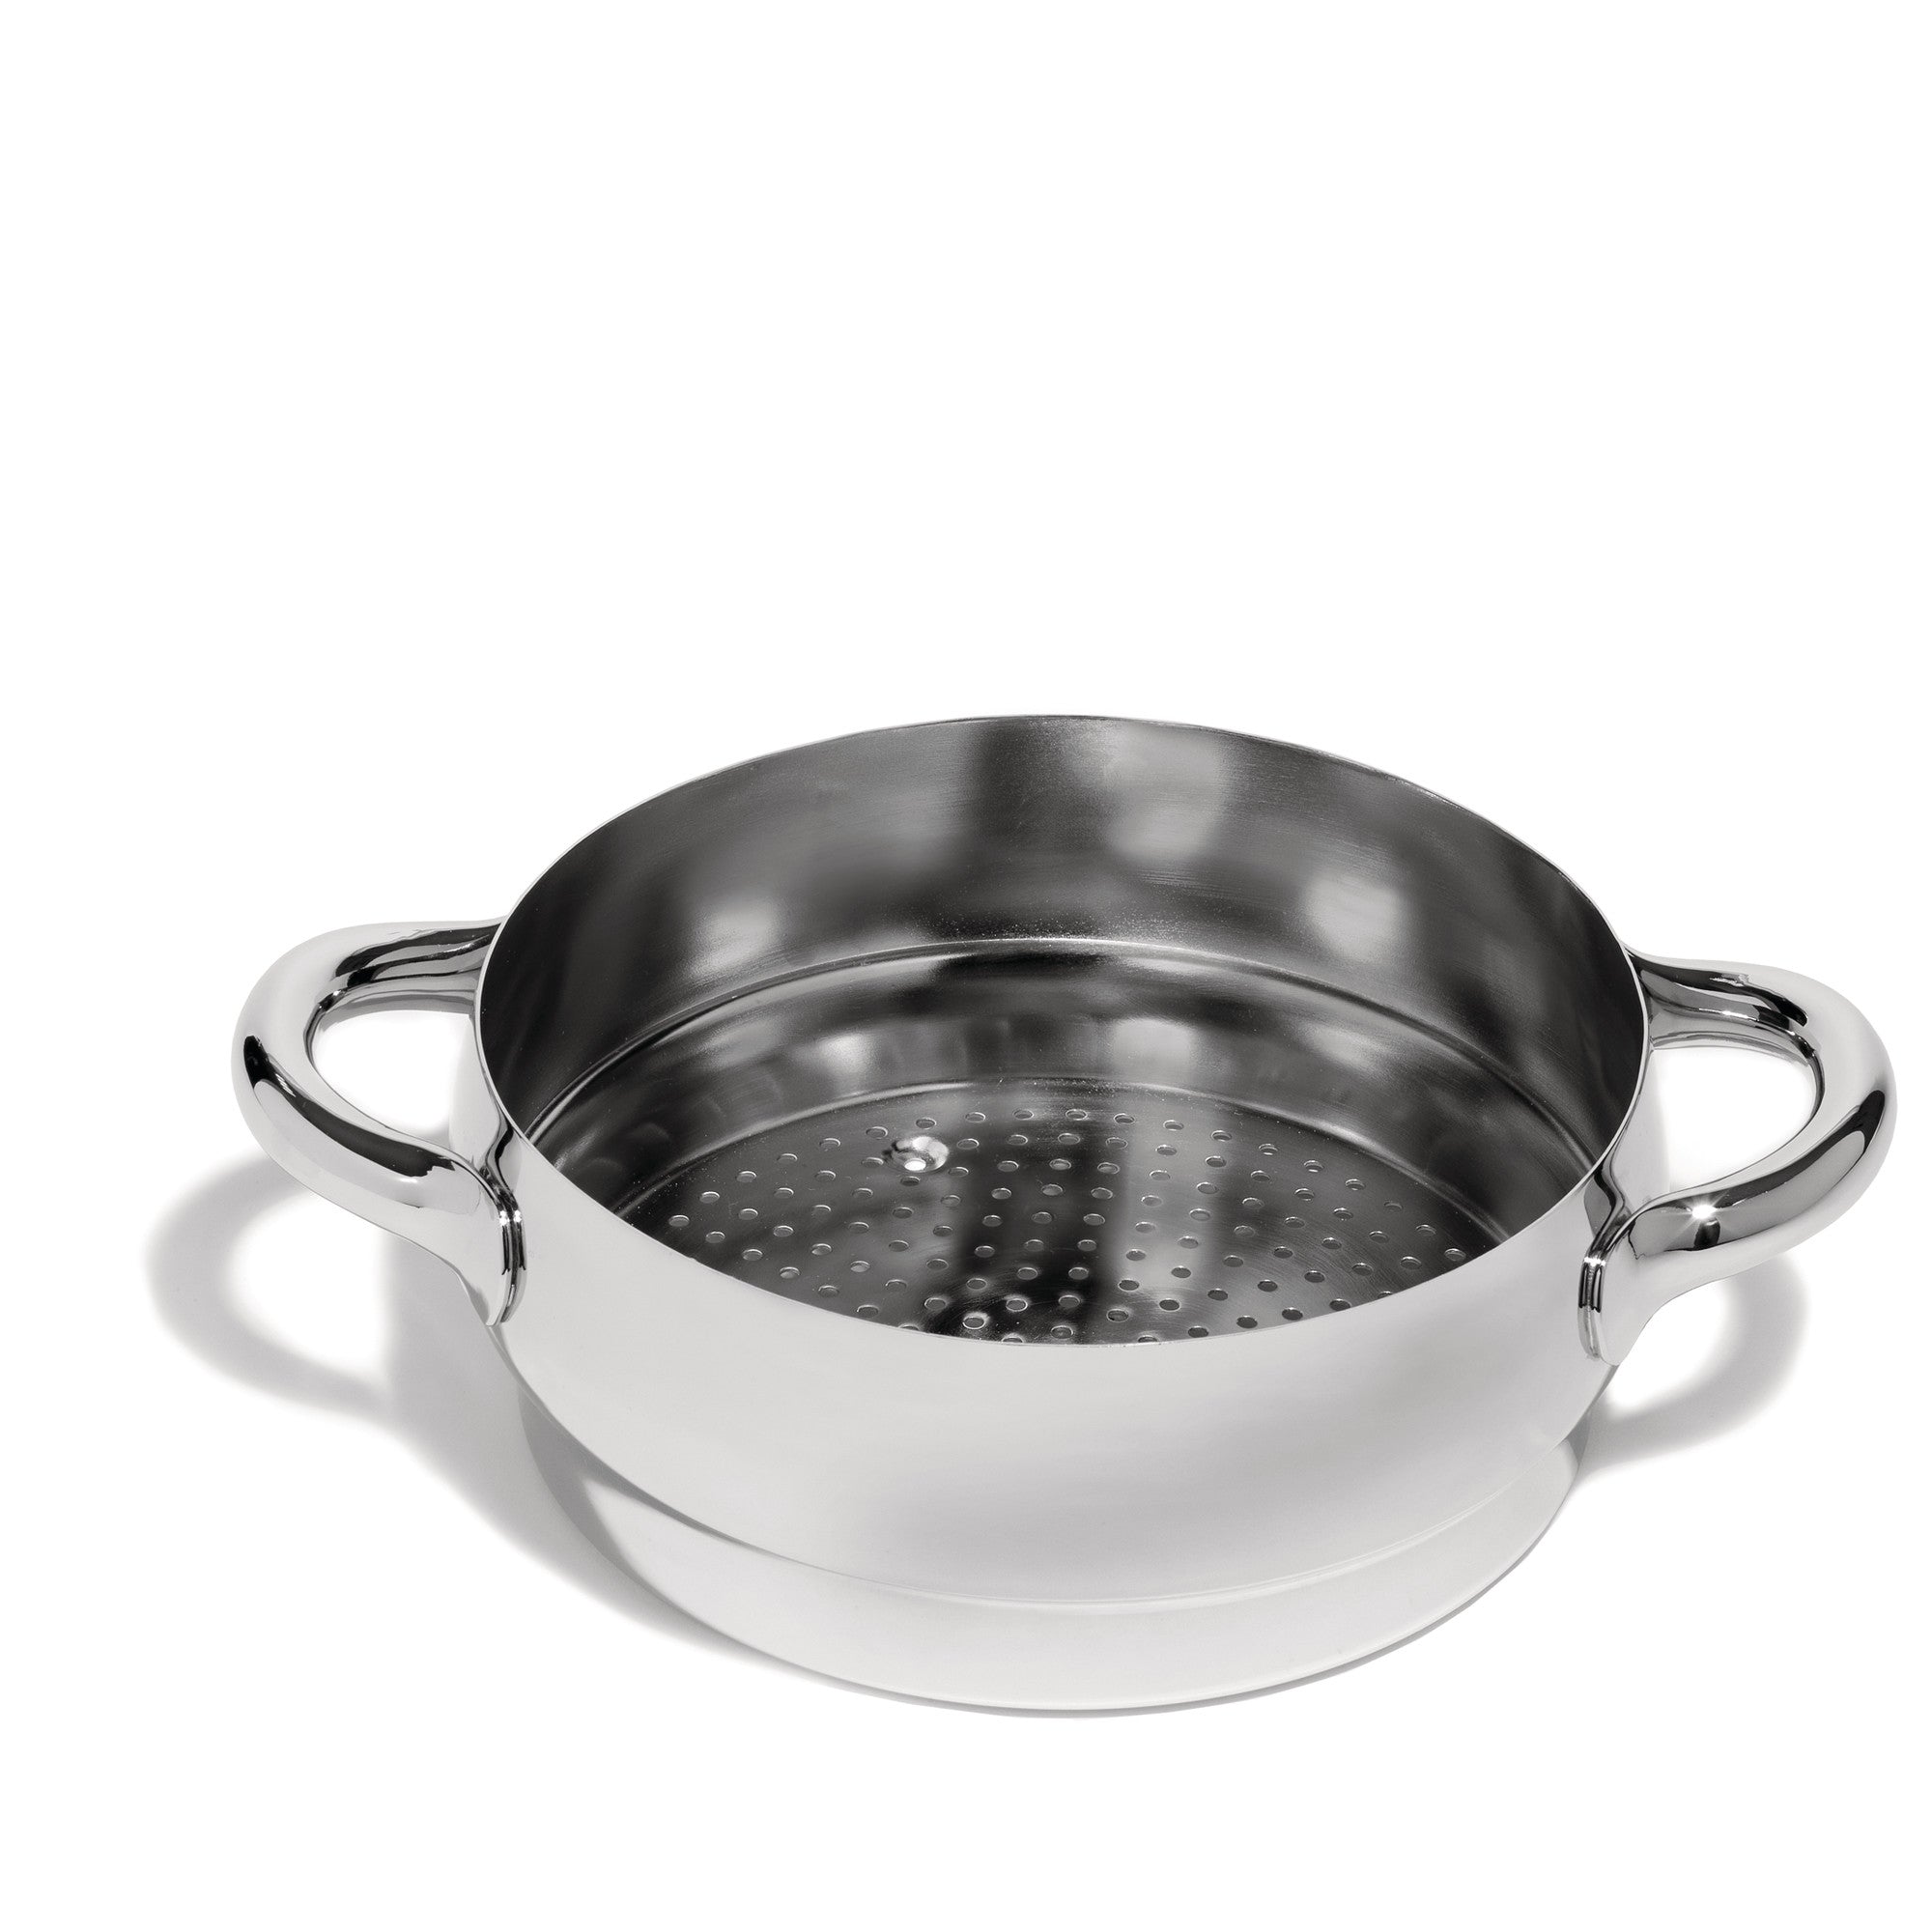 Alessi Mami basket for steam cooking